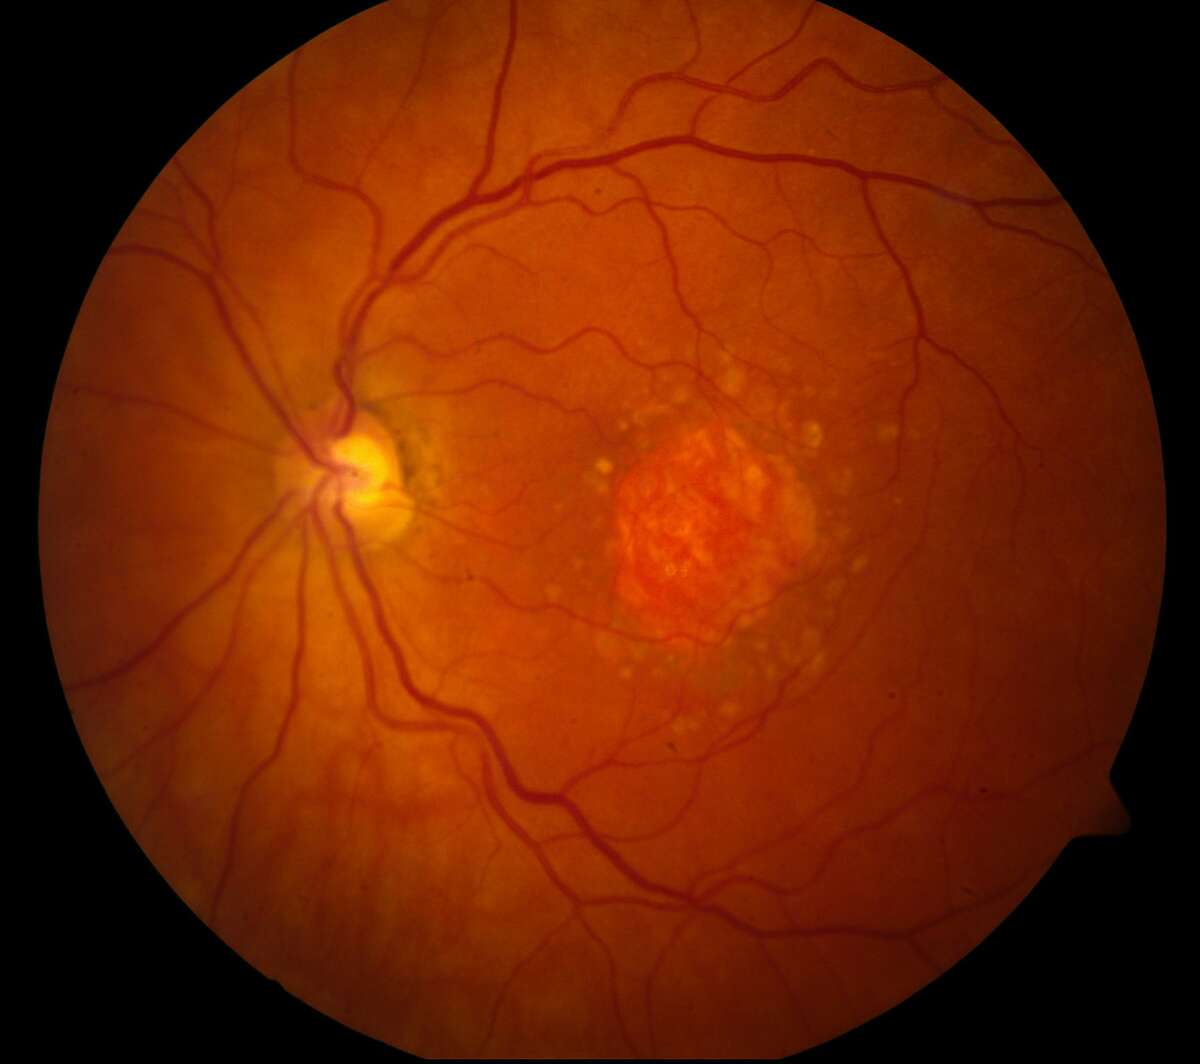 This image provided by the National Eye Institute shows a microscopic image of a retina being damaged by the so-called �dry� form of age-related macular degeneration. An experimental drug is showing promise against an eye disease that blinds older adults. Age-related macular degeneration gradually erodes seniors� central vision, making it difficult to read or see faces. (National Eye Institute via AP)